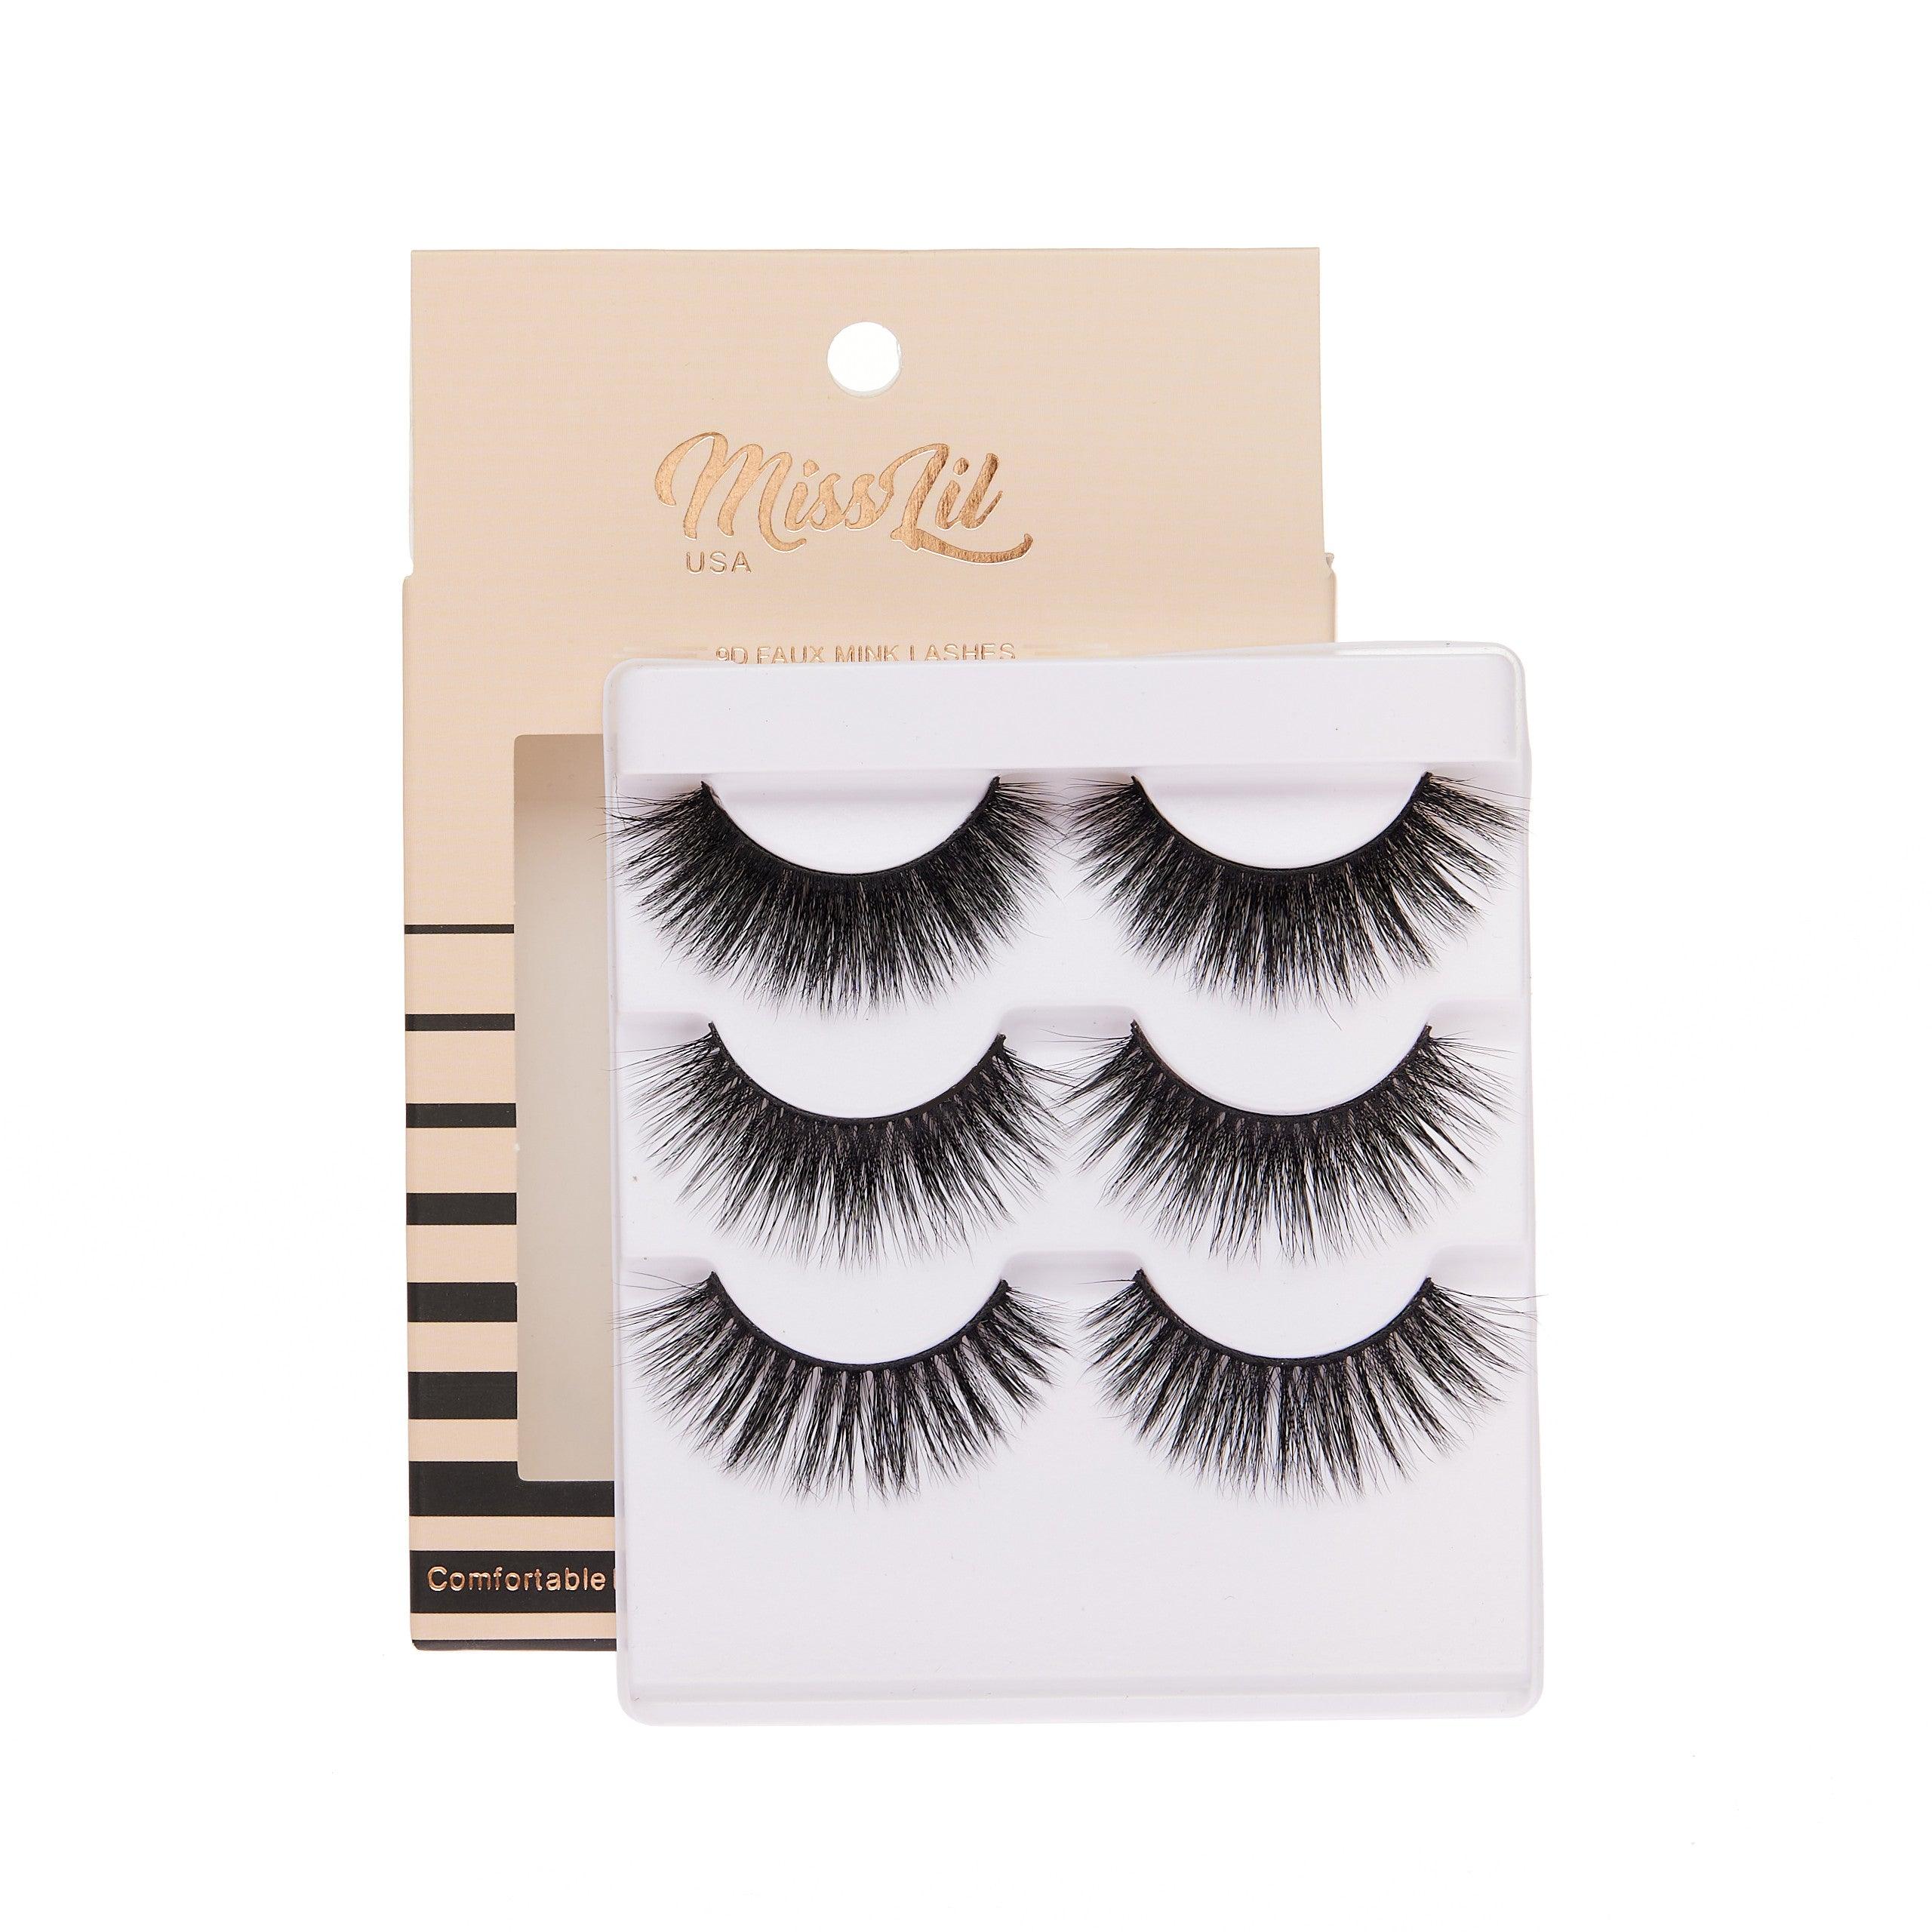 3-Pair Faux 9D Mink Eyelashes - Luxury Collection #16 - Pack of 3 - Miss Lil USA